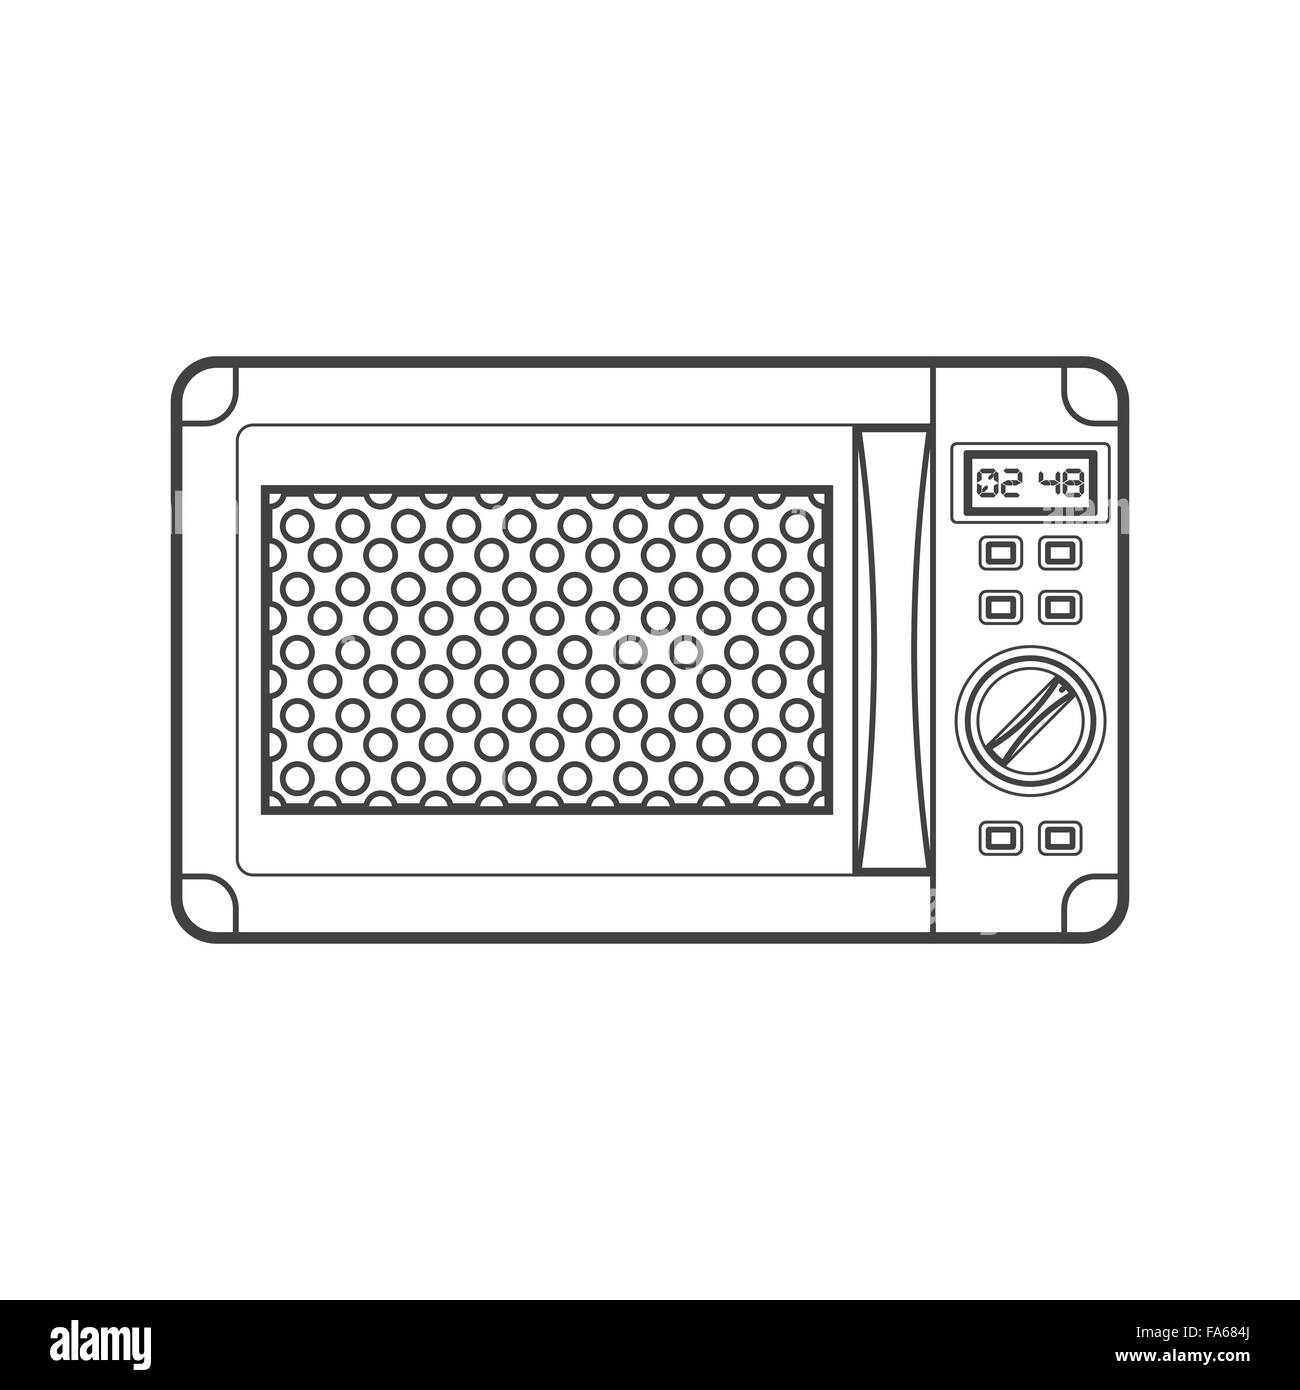 vector monochrome contour modern kitchen microwave oven isolated black outline illustration on white background Stock Vector